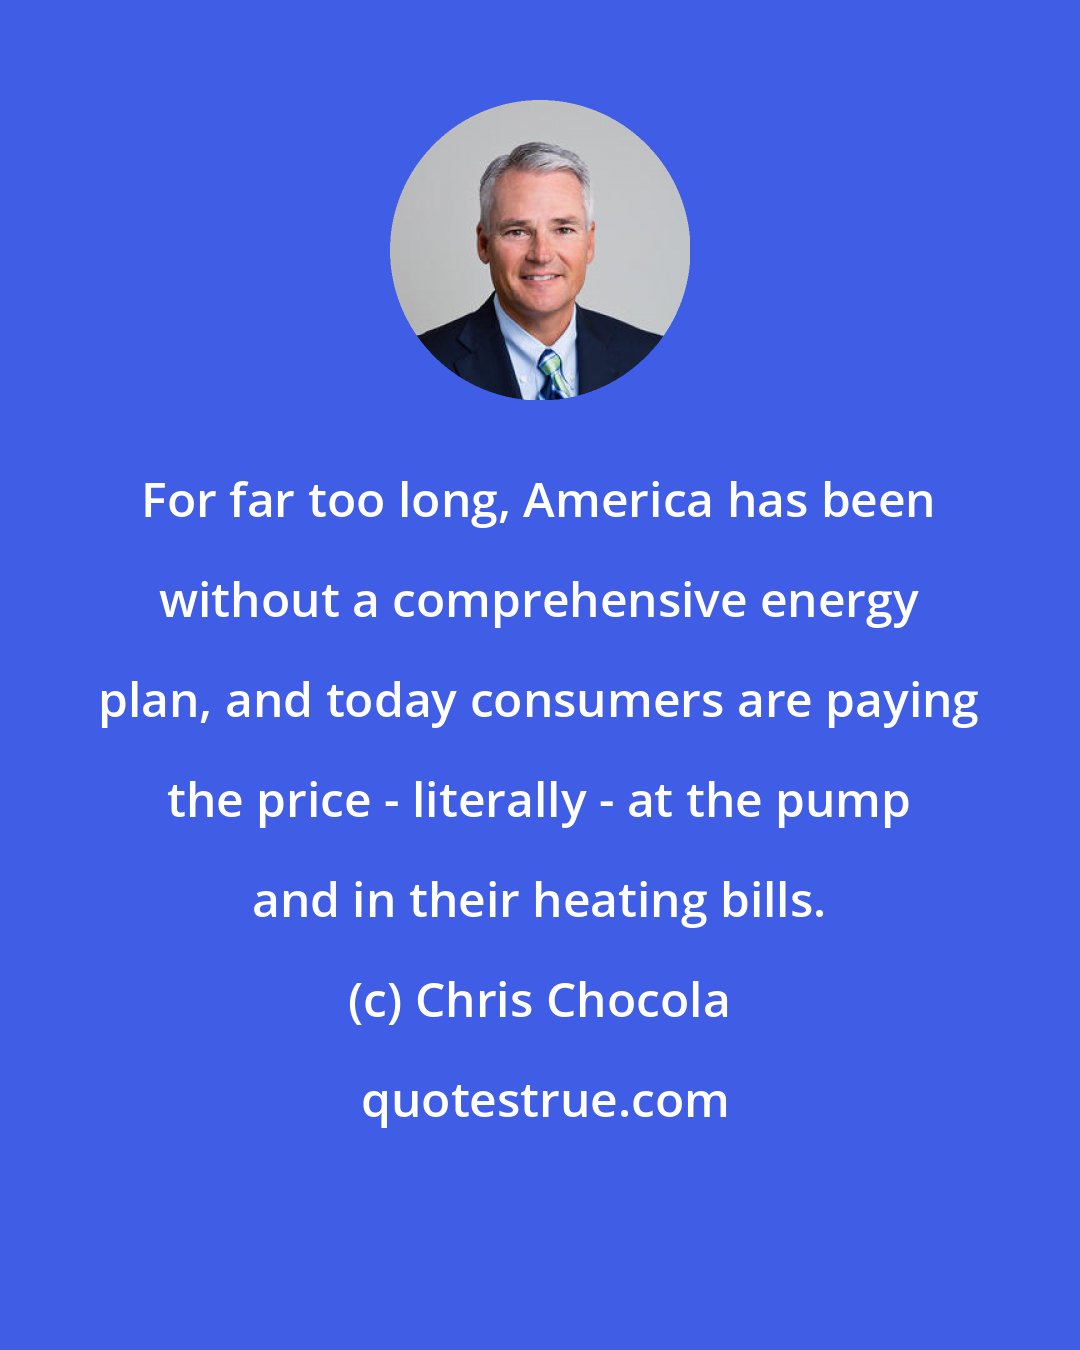 Chris Chocola: For far too long, America has been without a comprehensive energy plan, and today consumers are paying the price - literally - at the pump and in their heating bills.